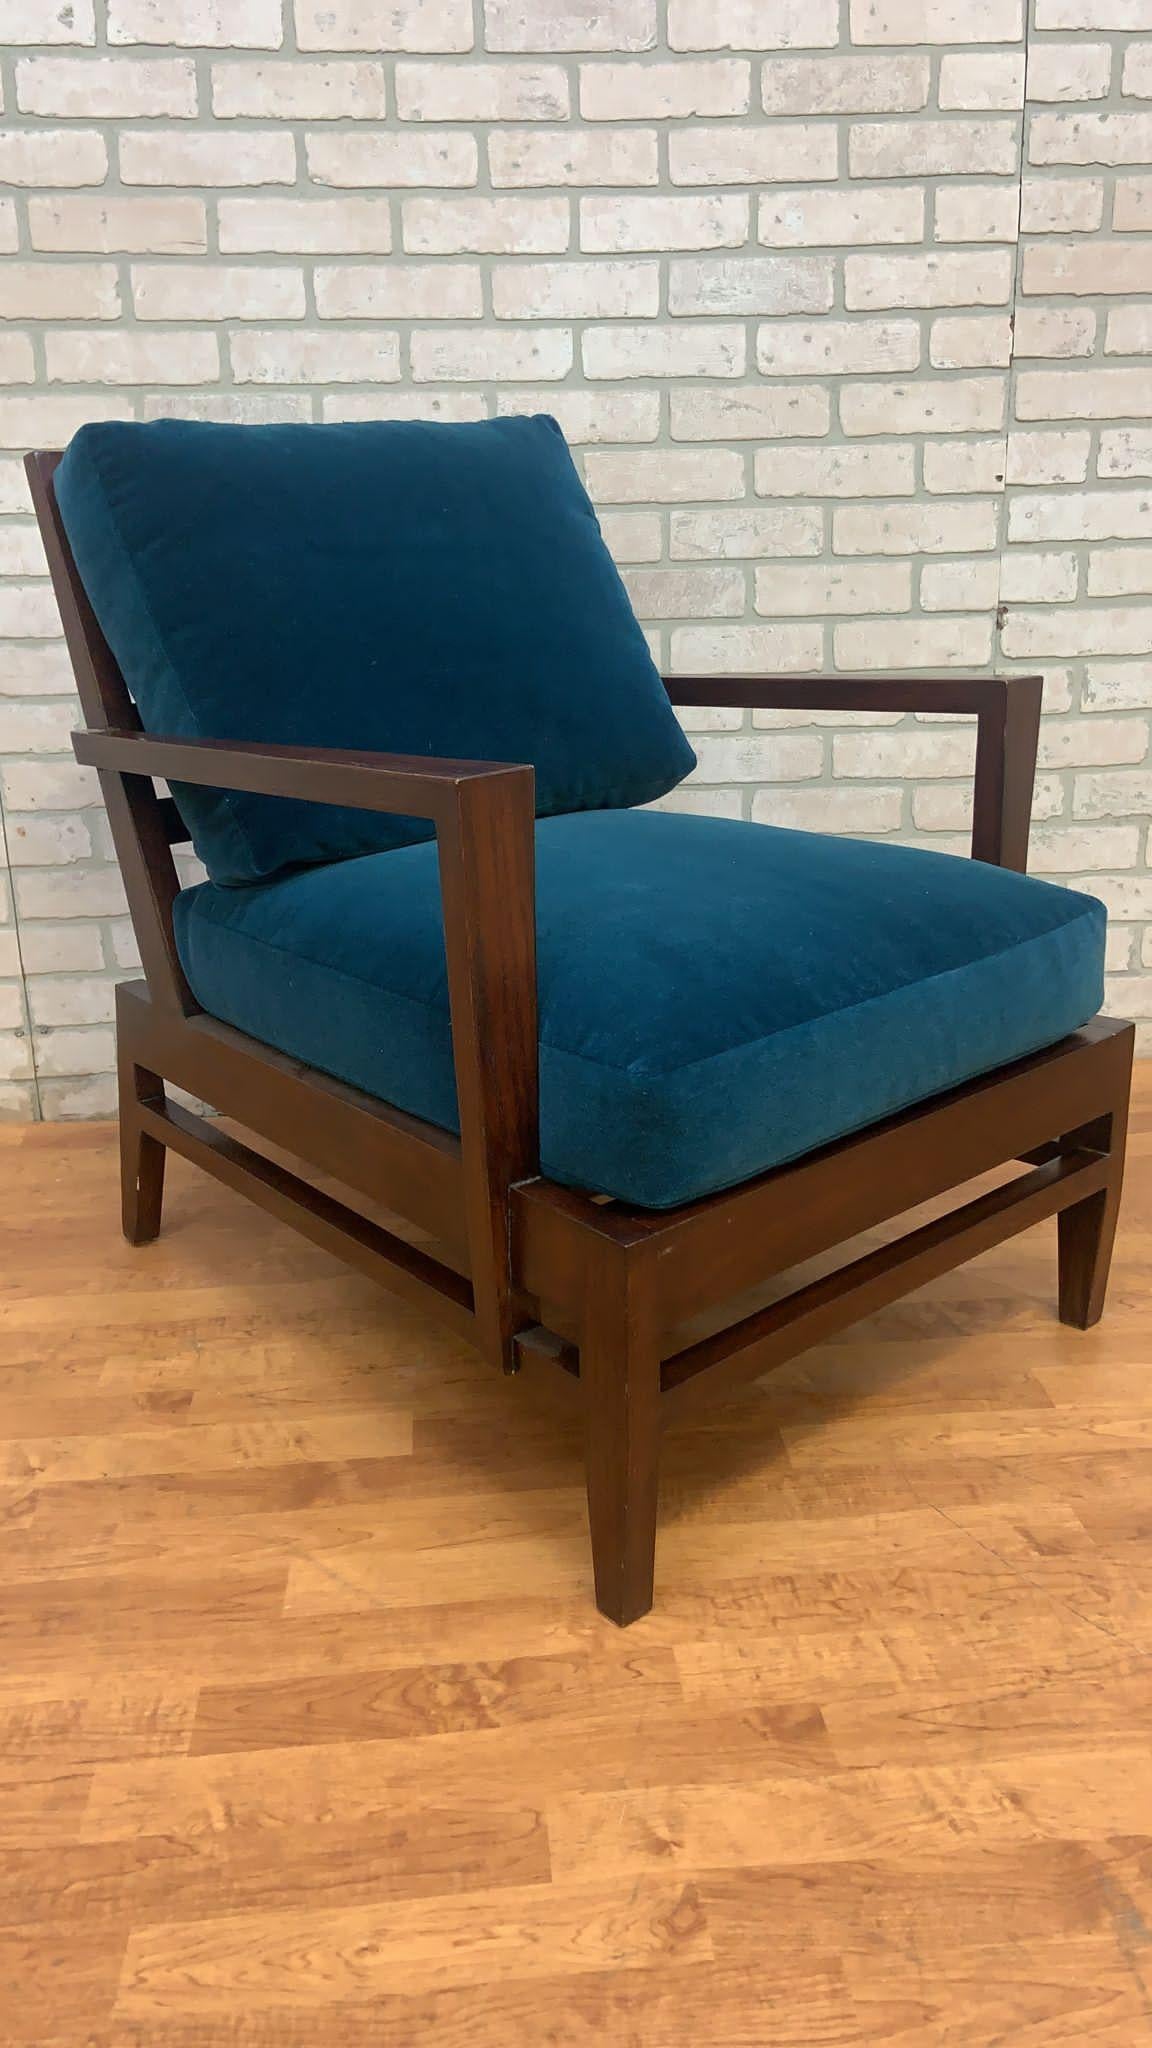 Vintage French Modern René Gabriel Cherry Wood Slat Back Lounge Chair Newly Upholstered in Plush Teal Italian Mohair

Fantastic vintage, French modern cherry wood slat-back lounge chair newly upholstered in a gorgeous down-filled plush teal